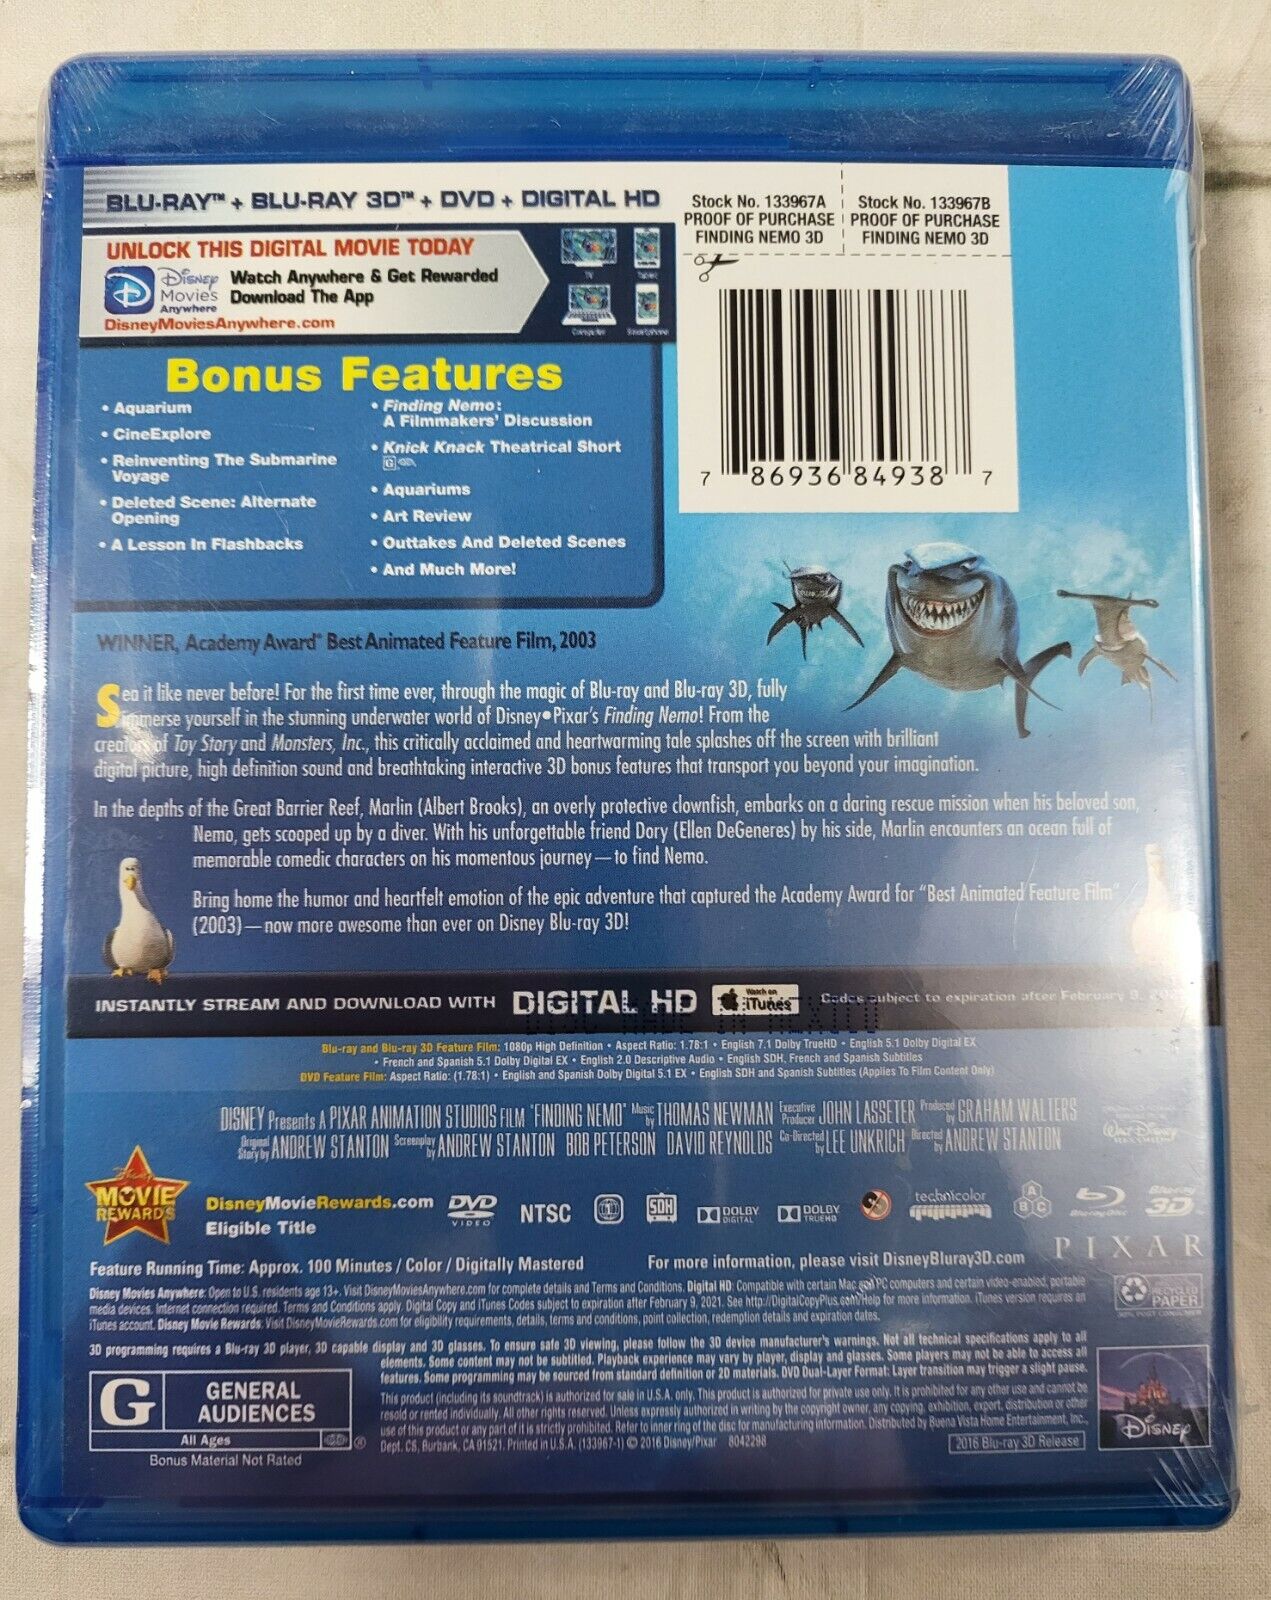 Finding Nemo Blu-ray, 3D, DVD. Digital Ultimate Collector's BRAND NEW SEALED